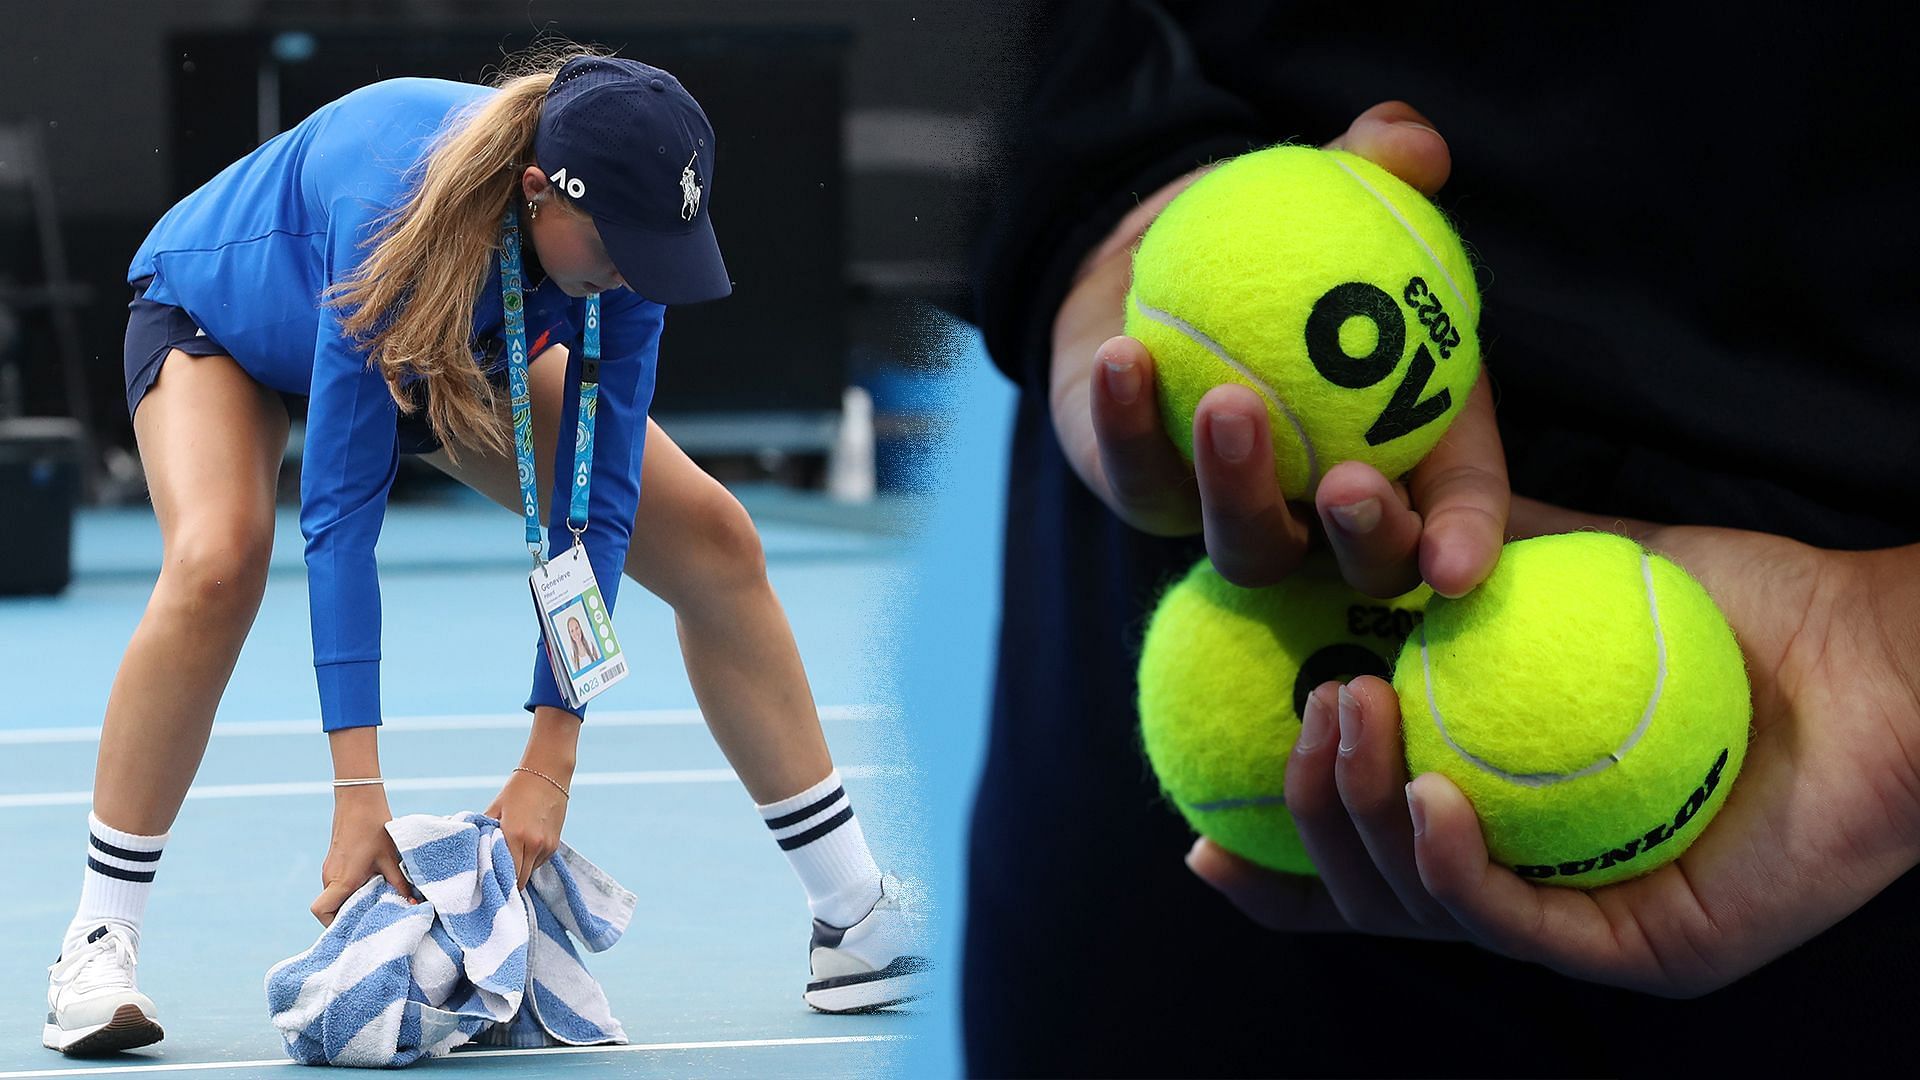 People around the world appalled by the working conditions of the ball kids at the 2023 Australian Open.